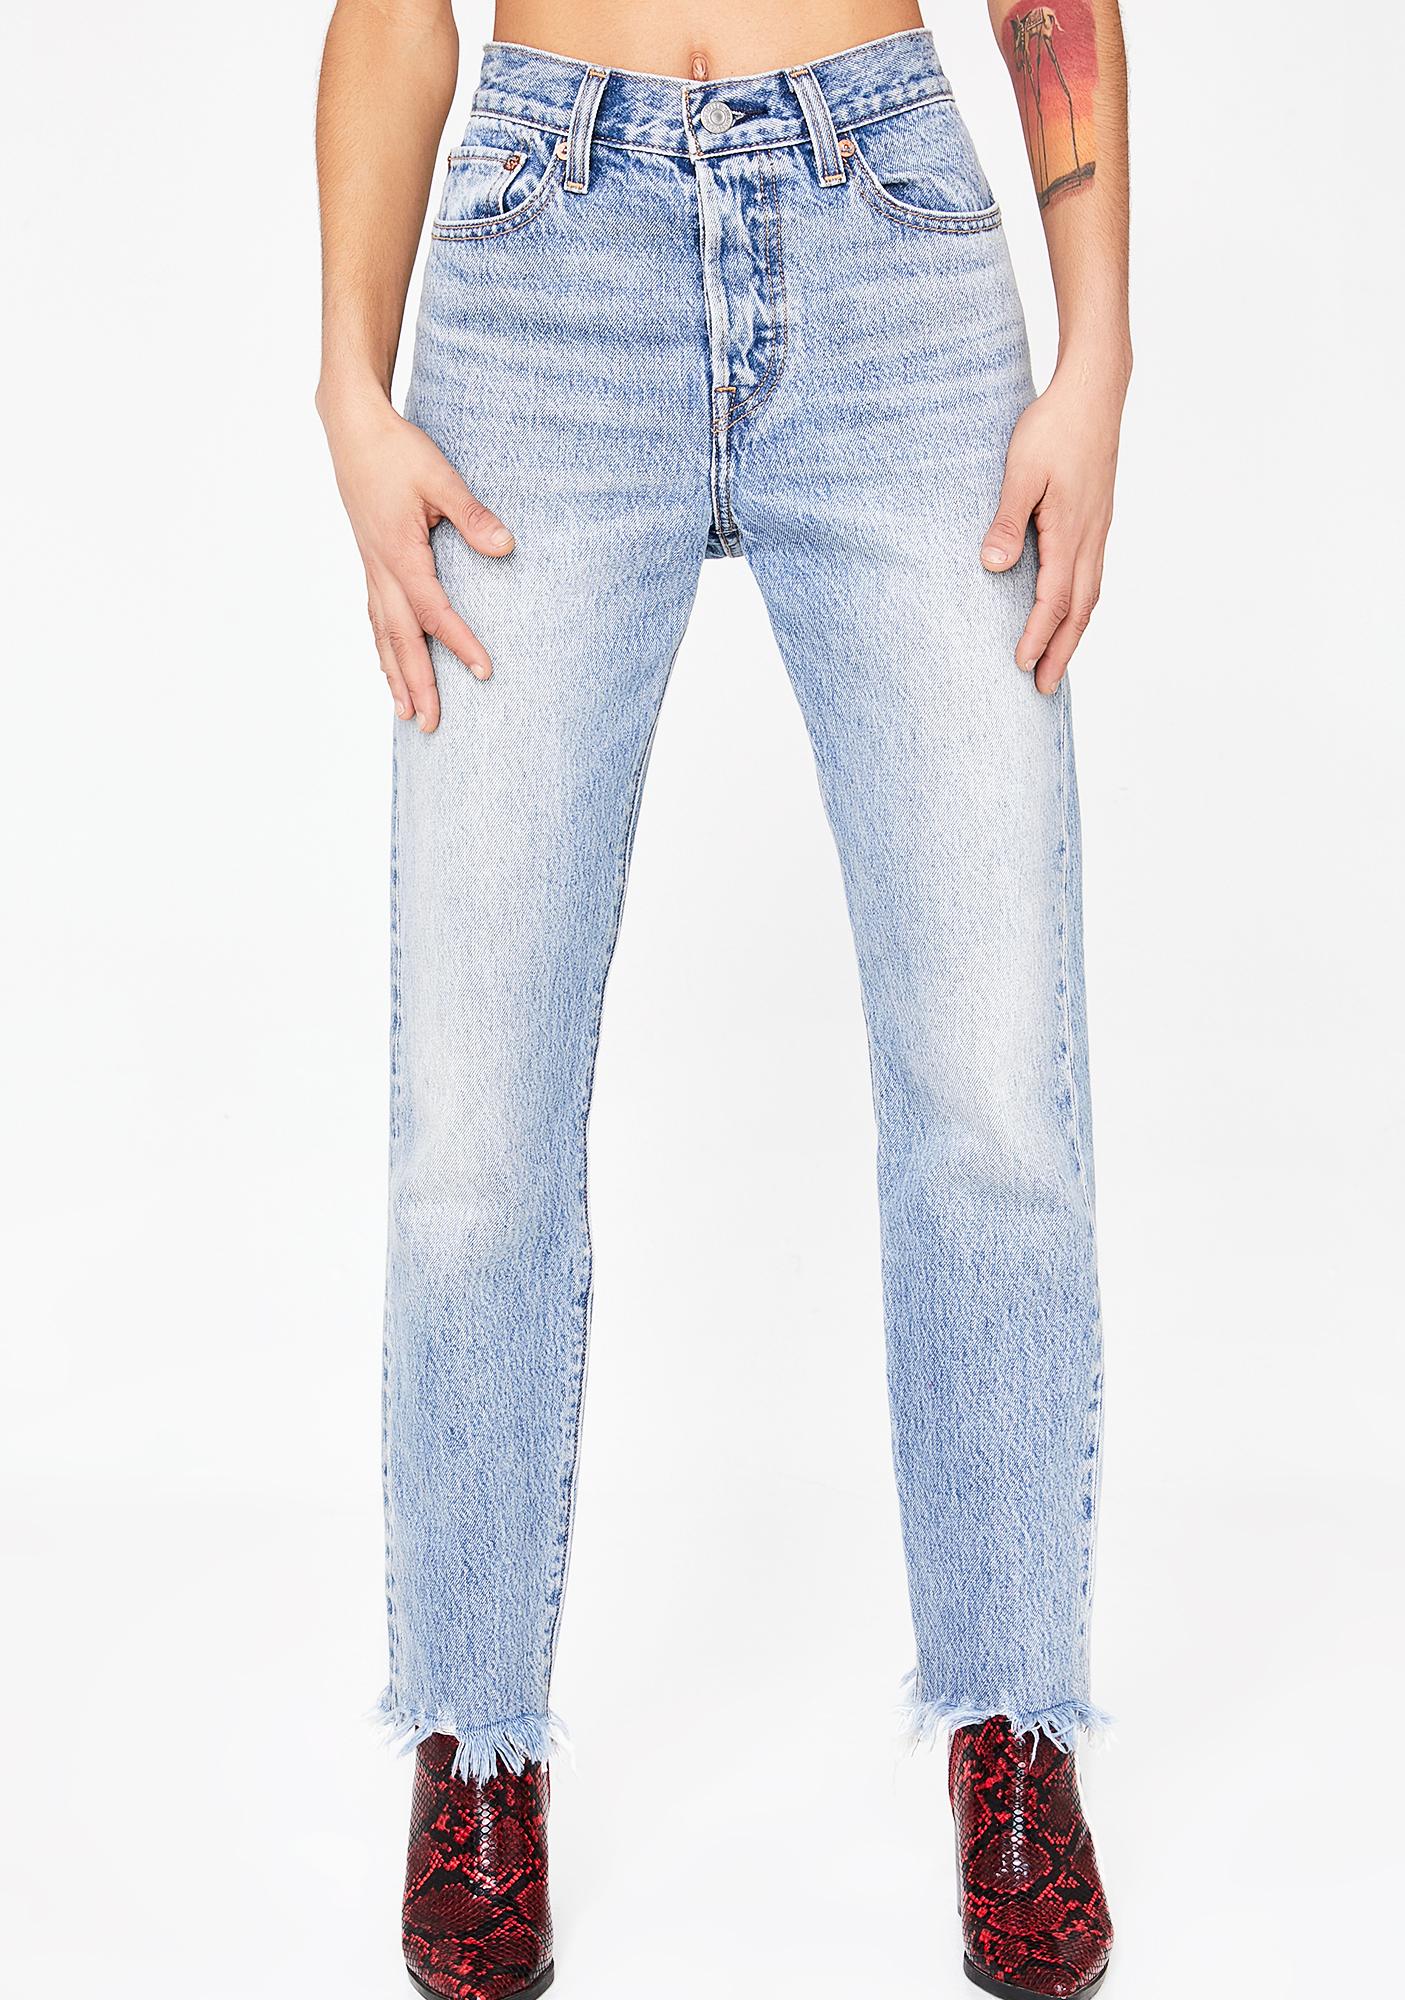 wedgie icon fit levi's